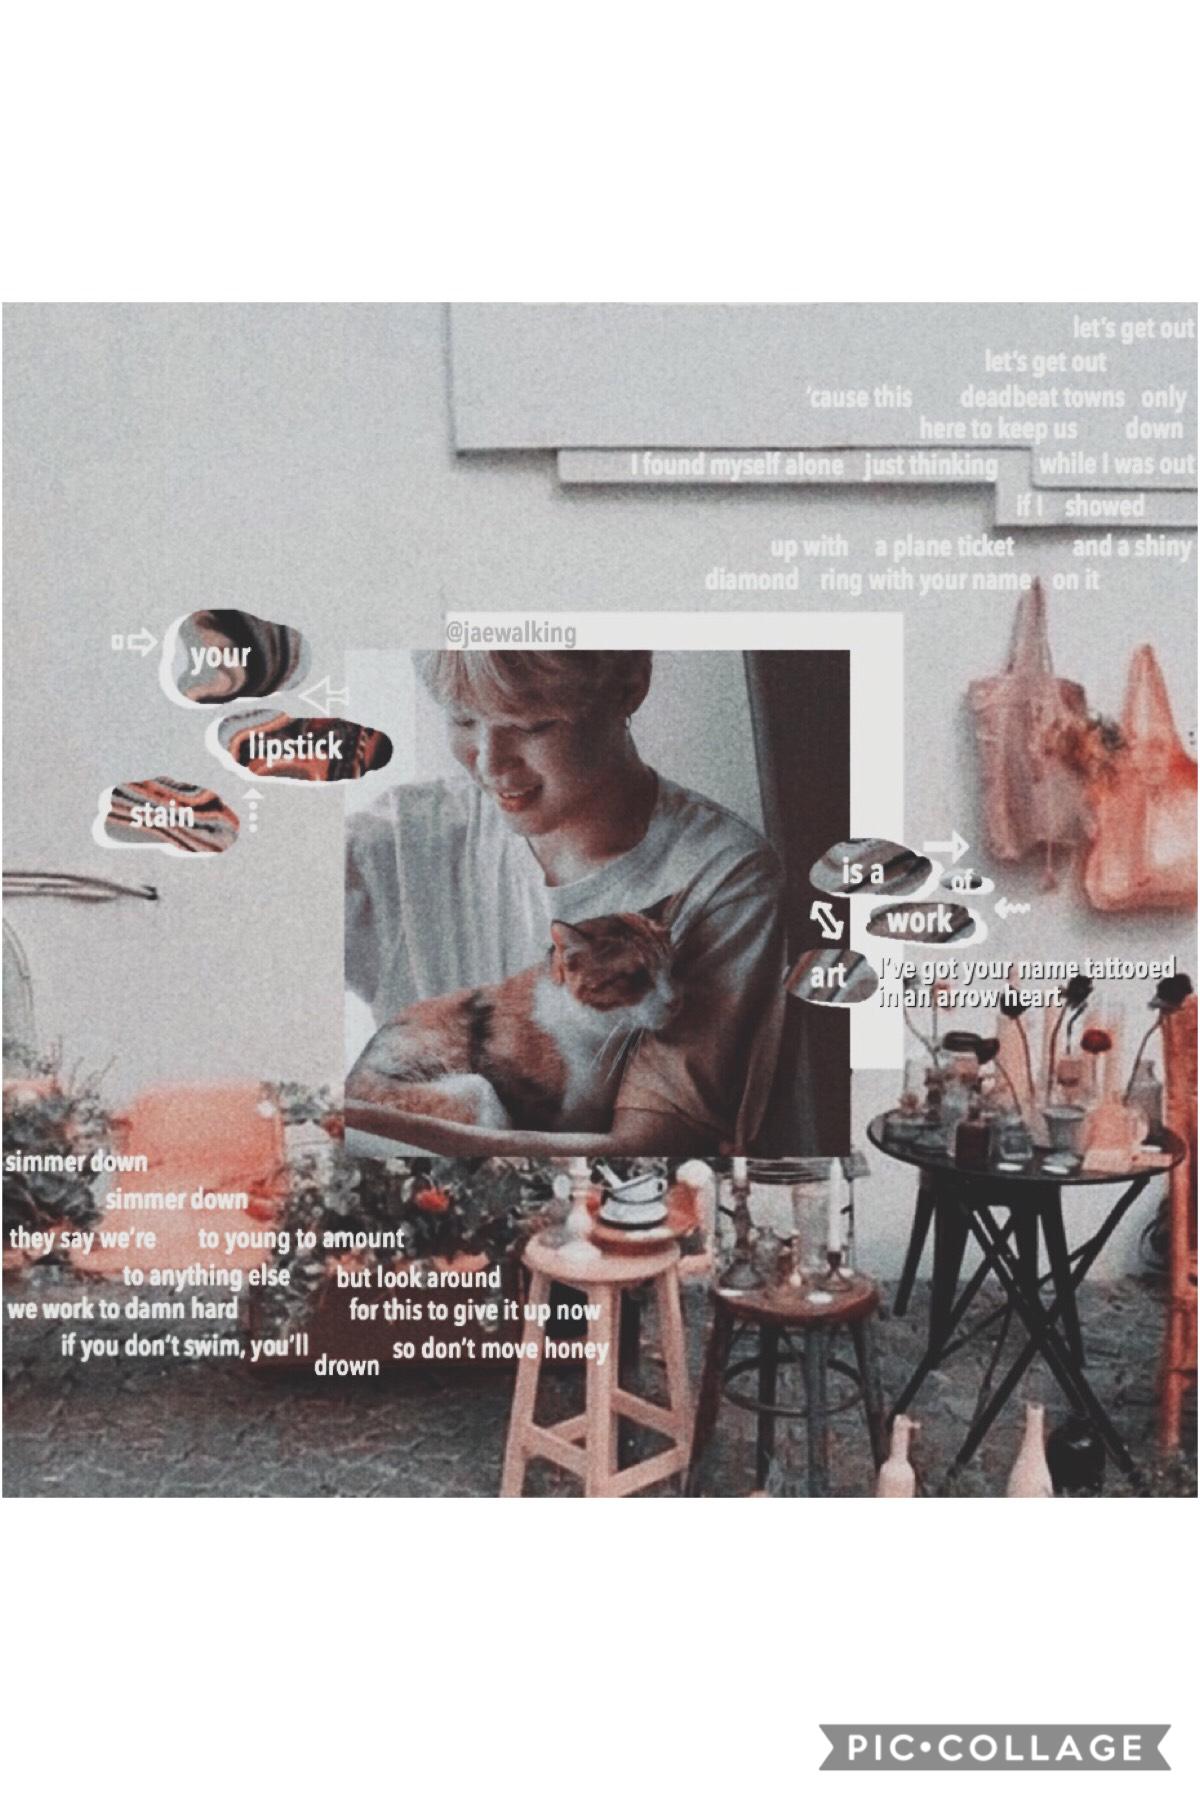 🍚🍚hIGH rICE🍚🍚
qotd: name the song the quotes in this edit r from
if you get it i’ll give u a gold star

quick edit😬
sorry for all the cluttered mess surrounding jimin. how uncentered this is... smh😔